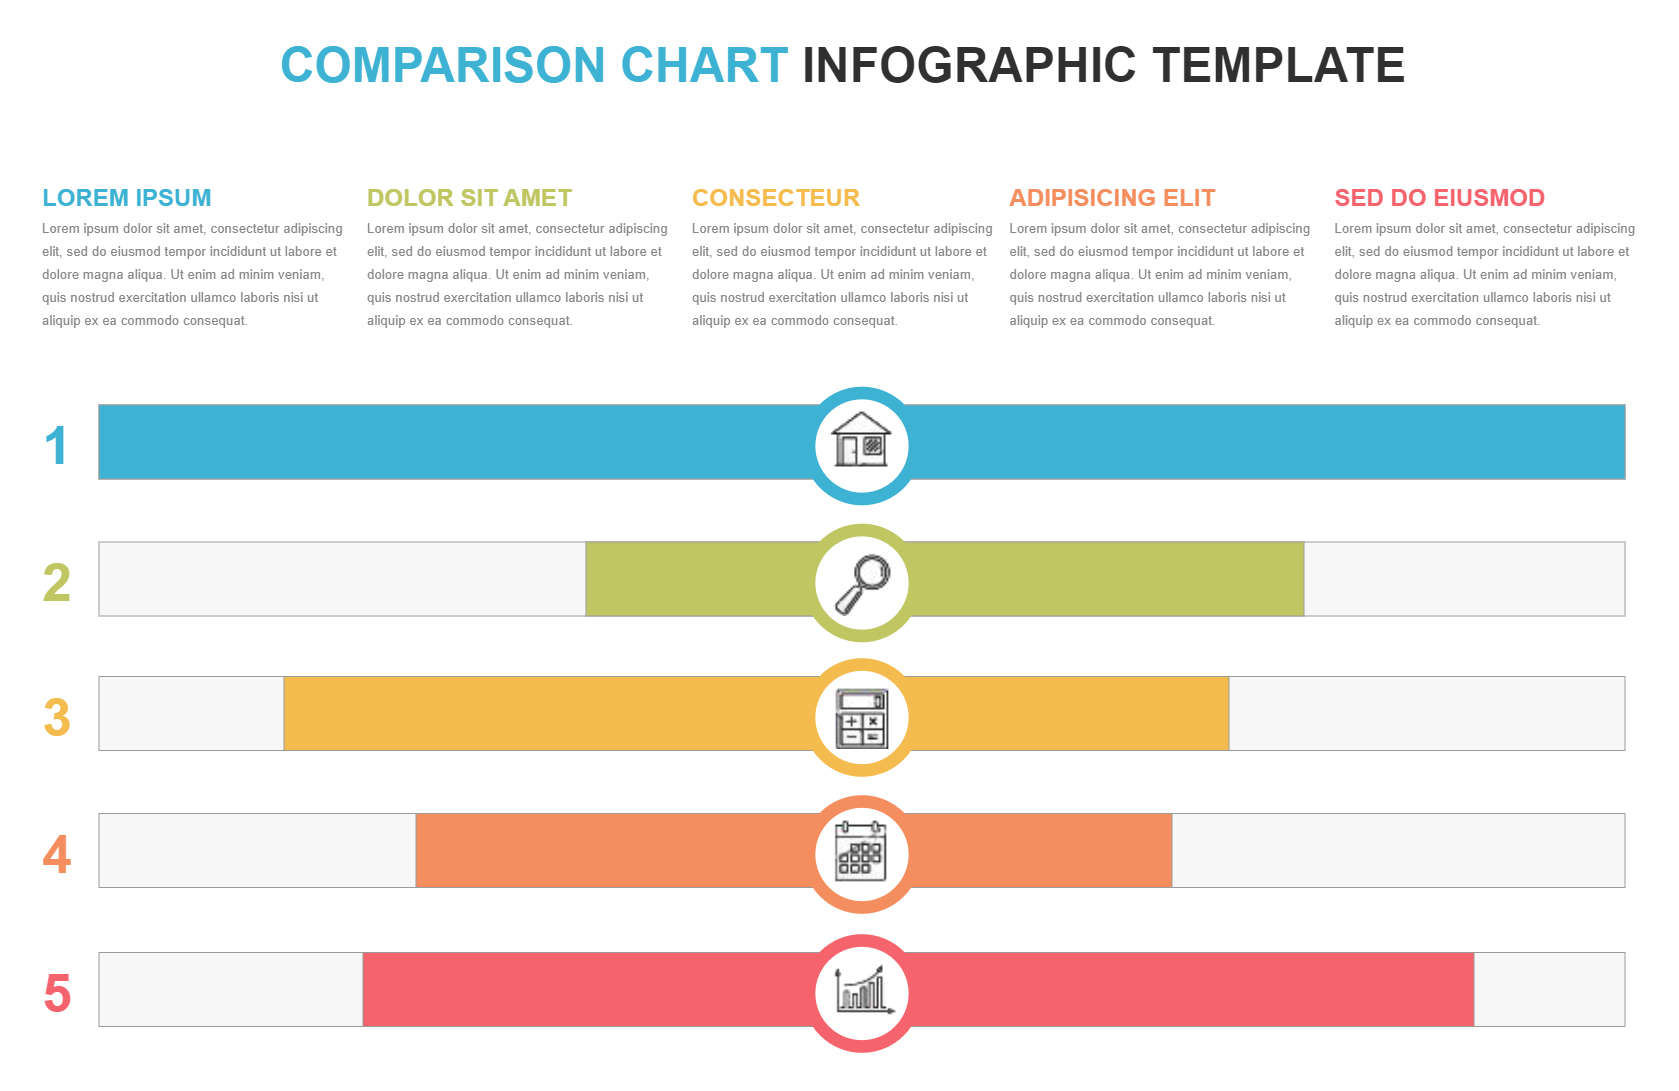 Comparison Chart Infographic Table Online Examples